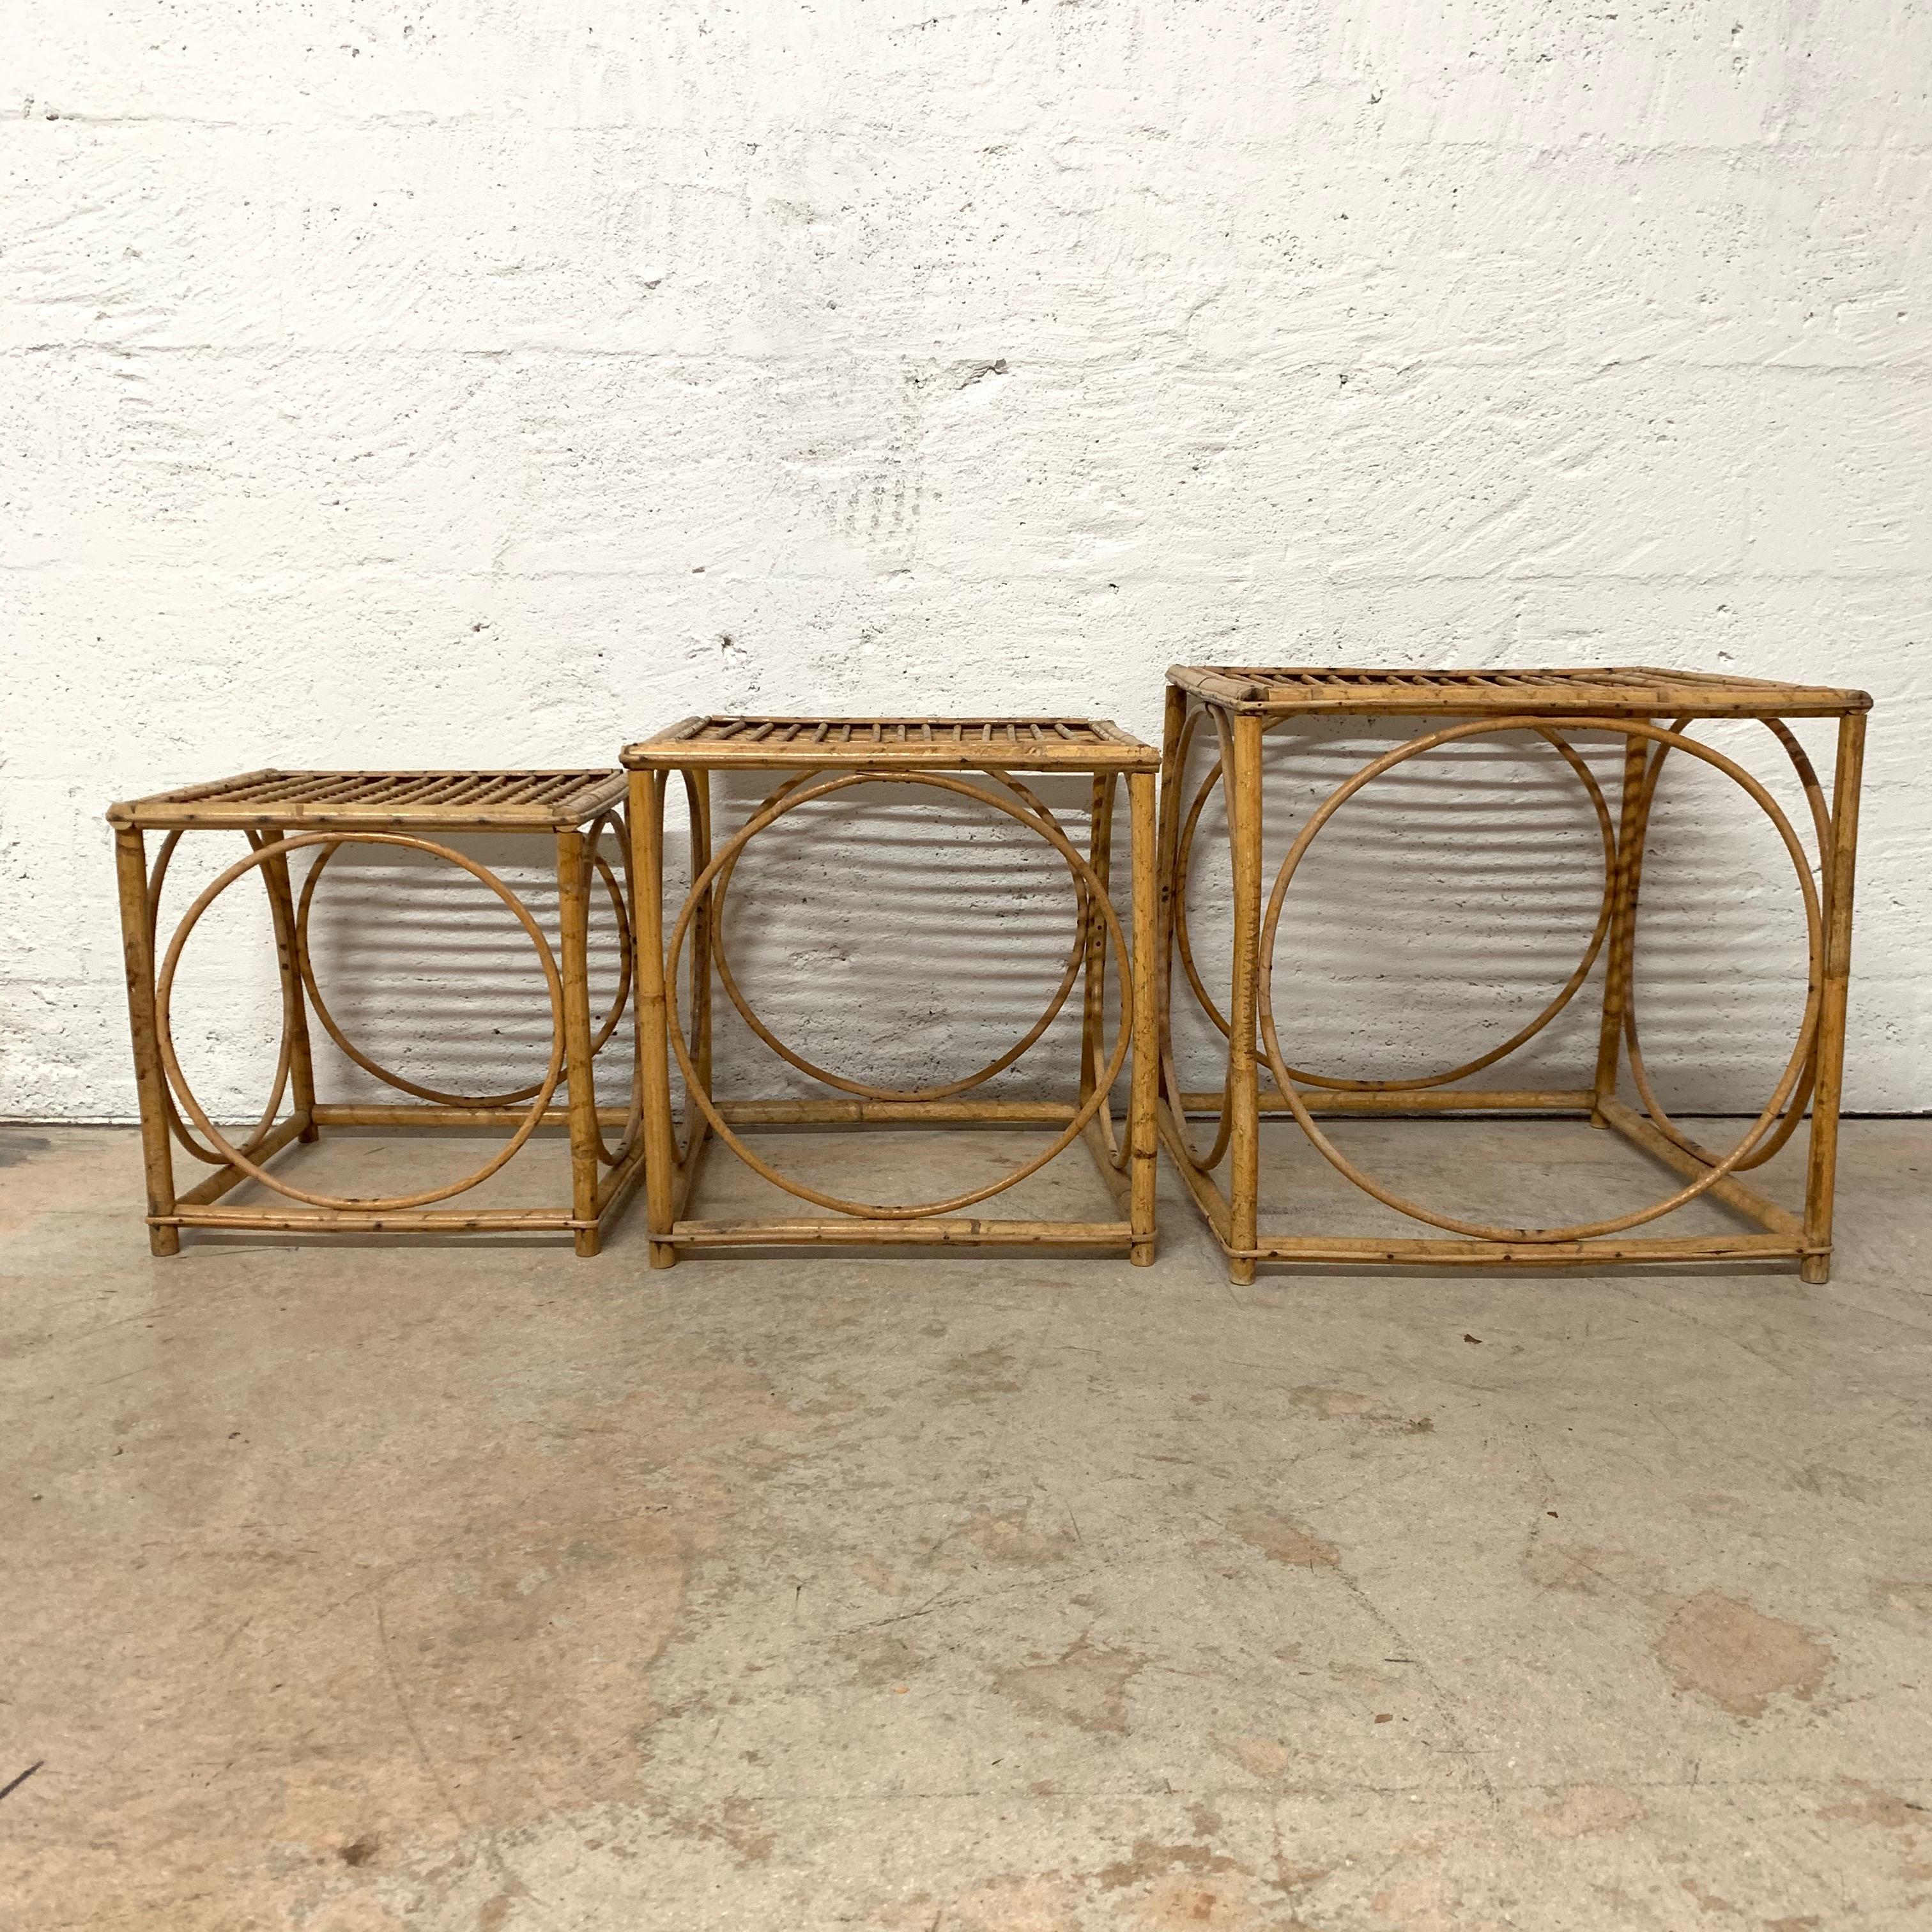 Unique set of three nesting or bunching tables in a square stacking cube shape with inset circular design, rendered in rattan, Italian attributed to Franco Albini

Rattan, wicker, bamboo.